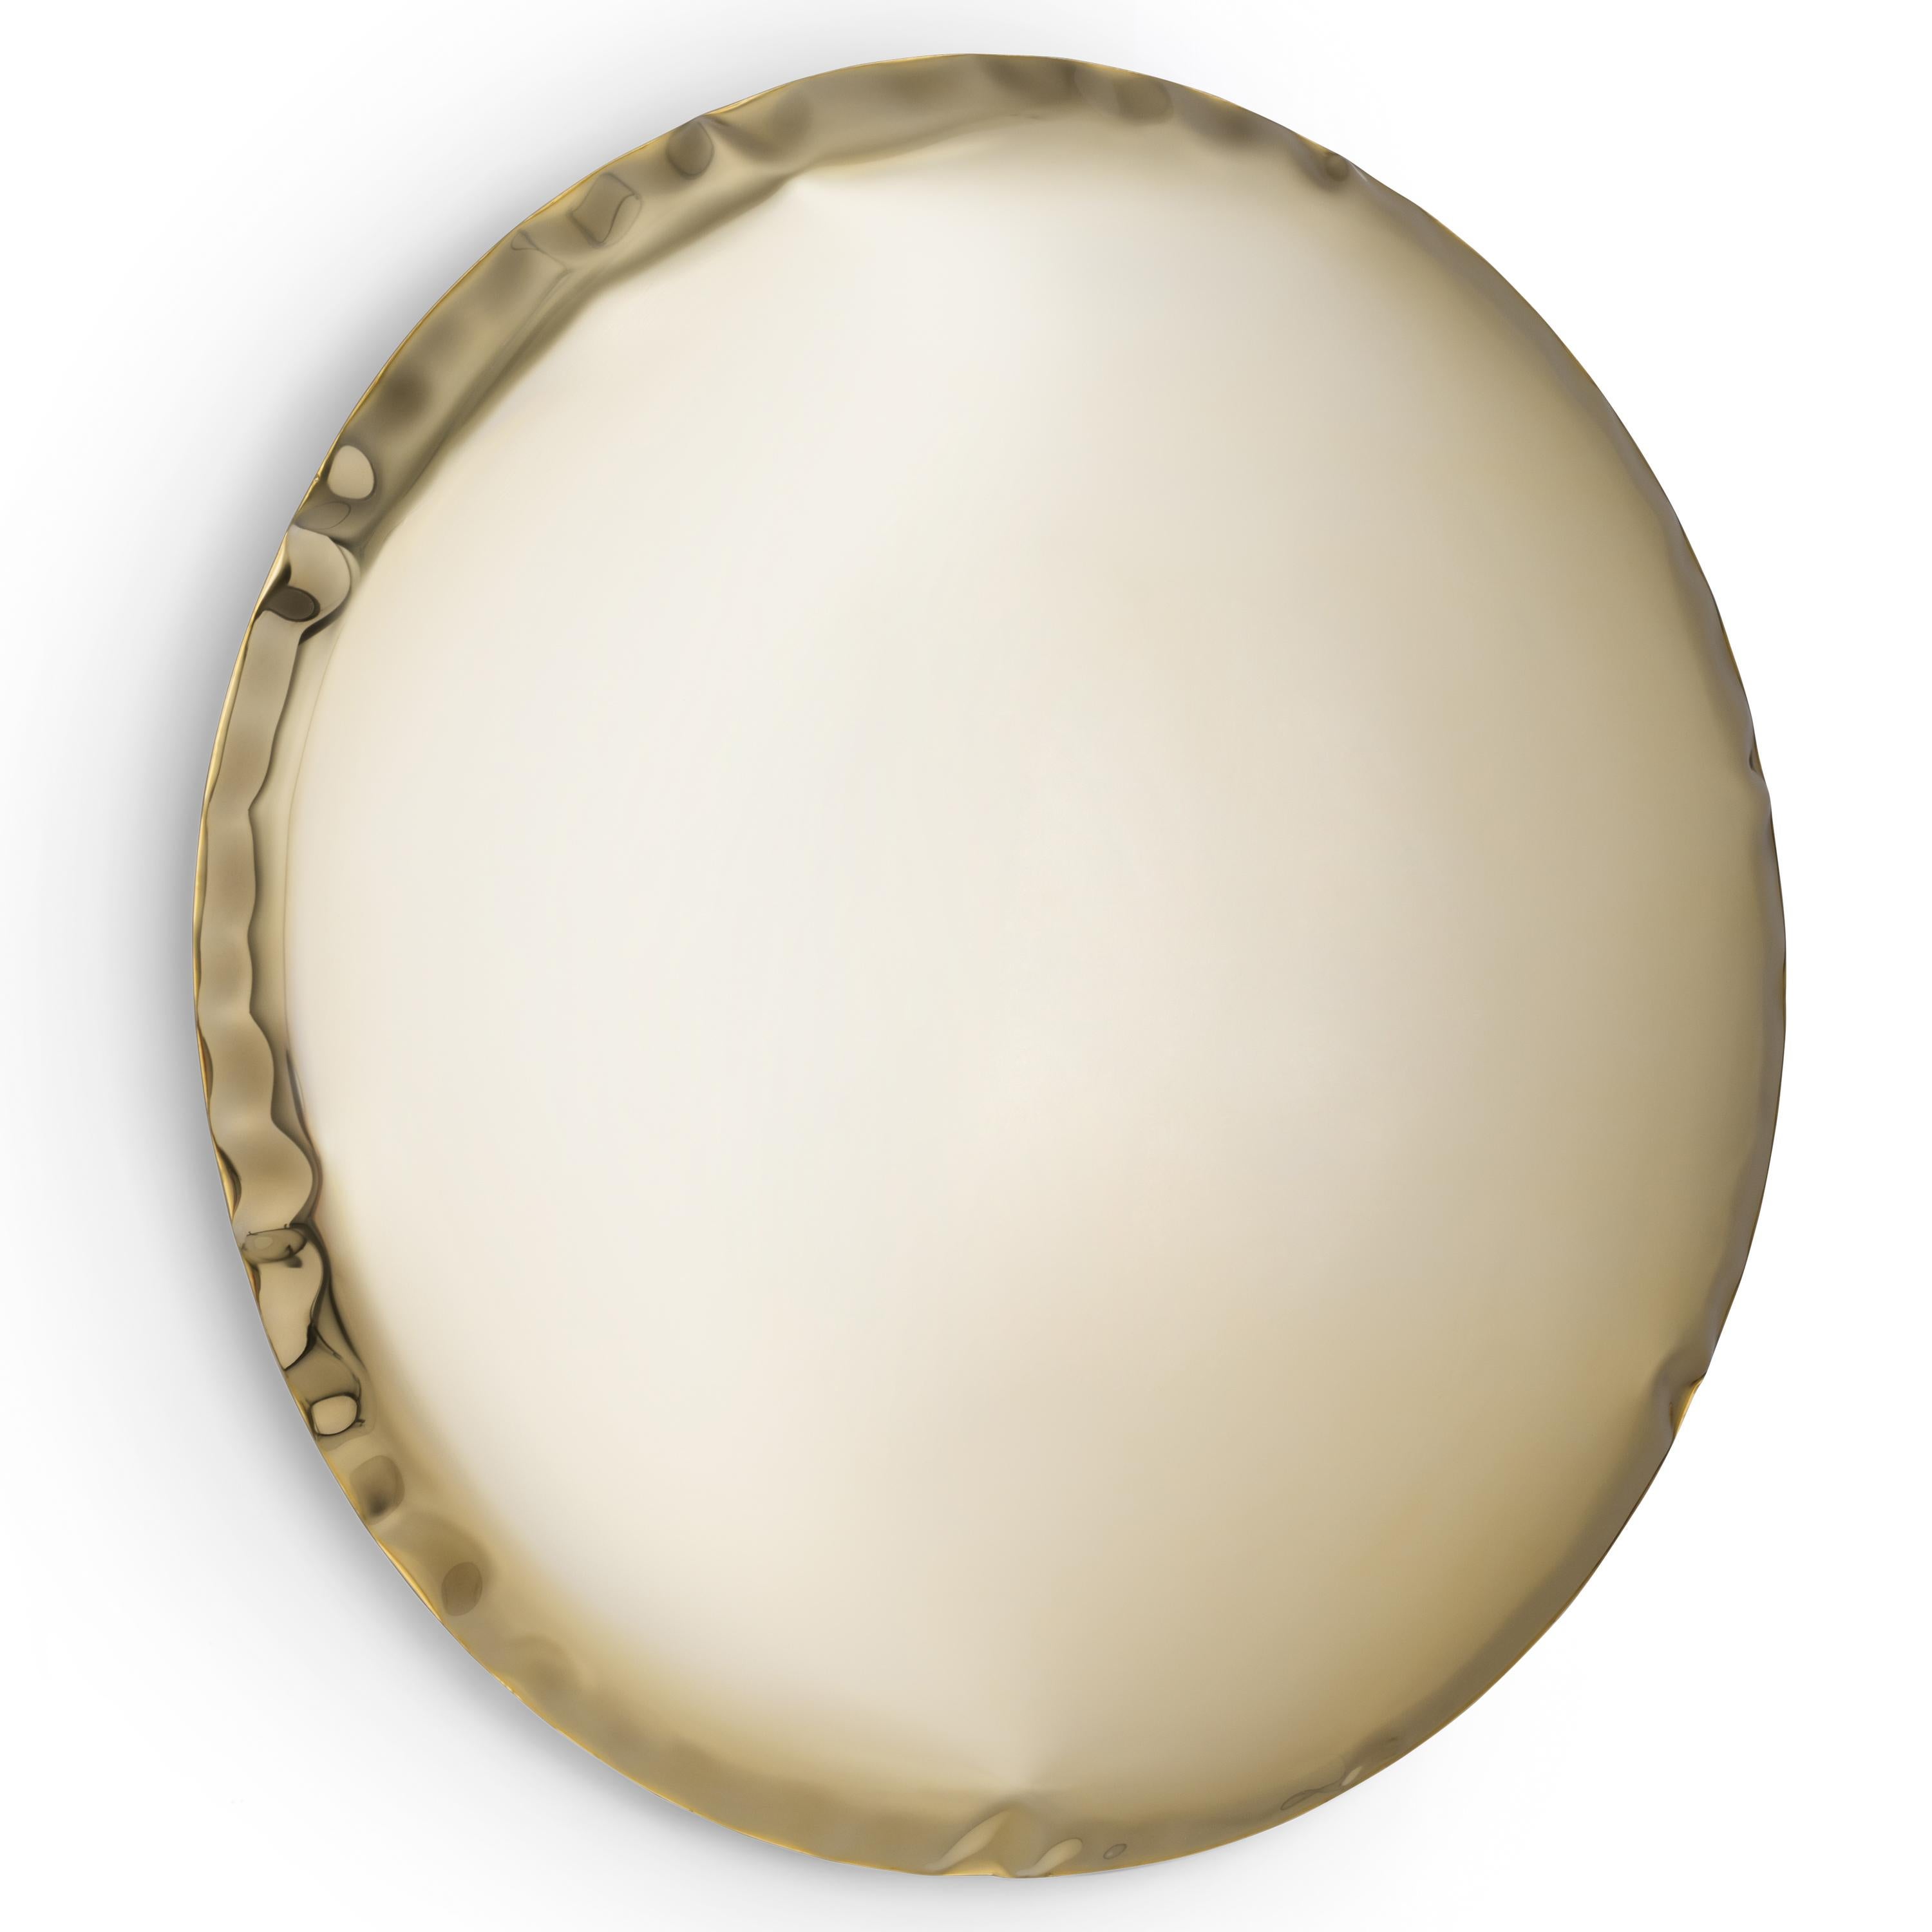 Contemporary Mirror 'OKO 150', AURUM Collection, Classic Gold, by Zieta For Sale 1